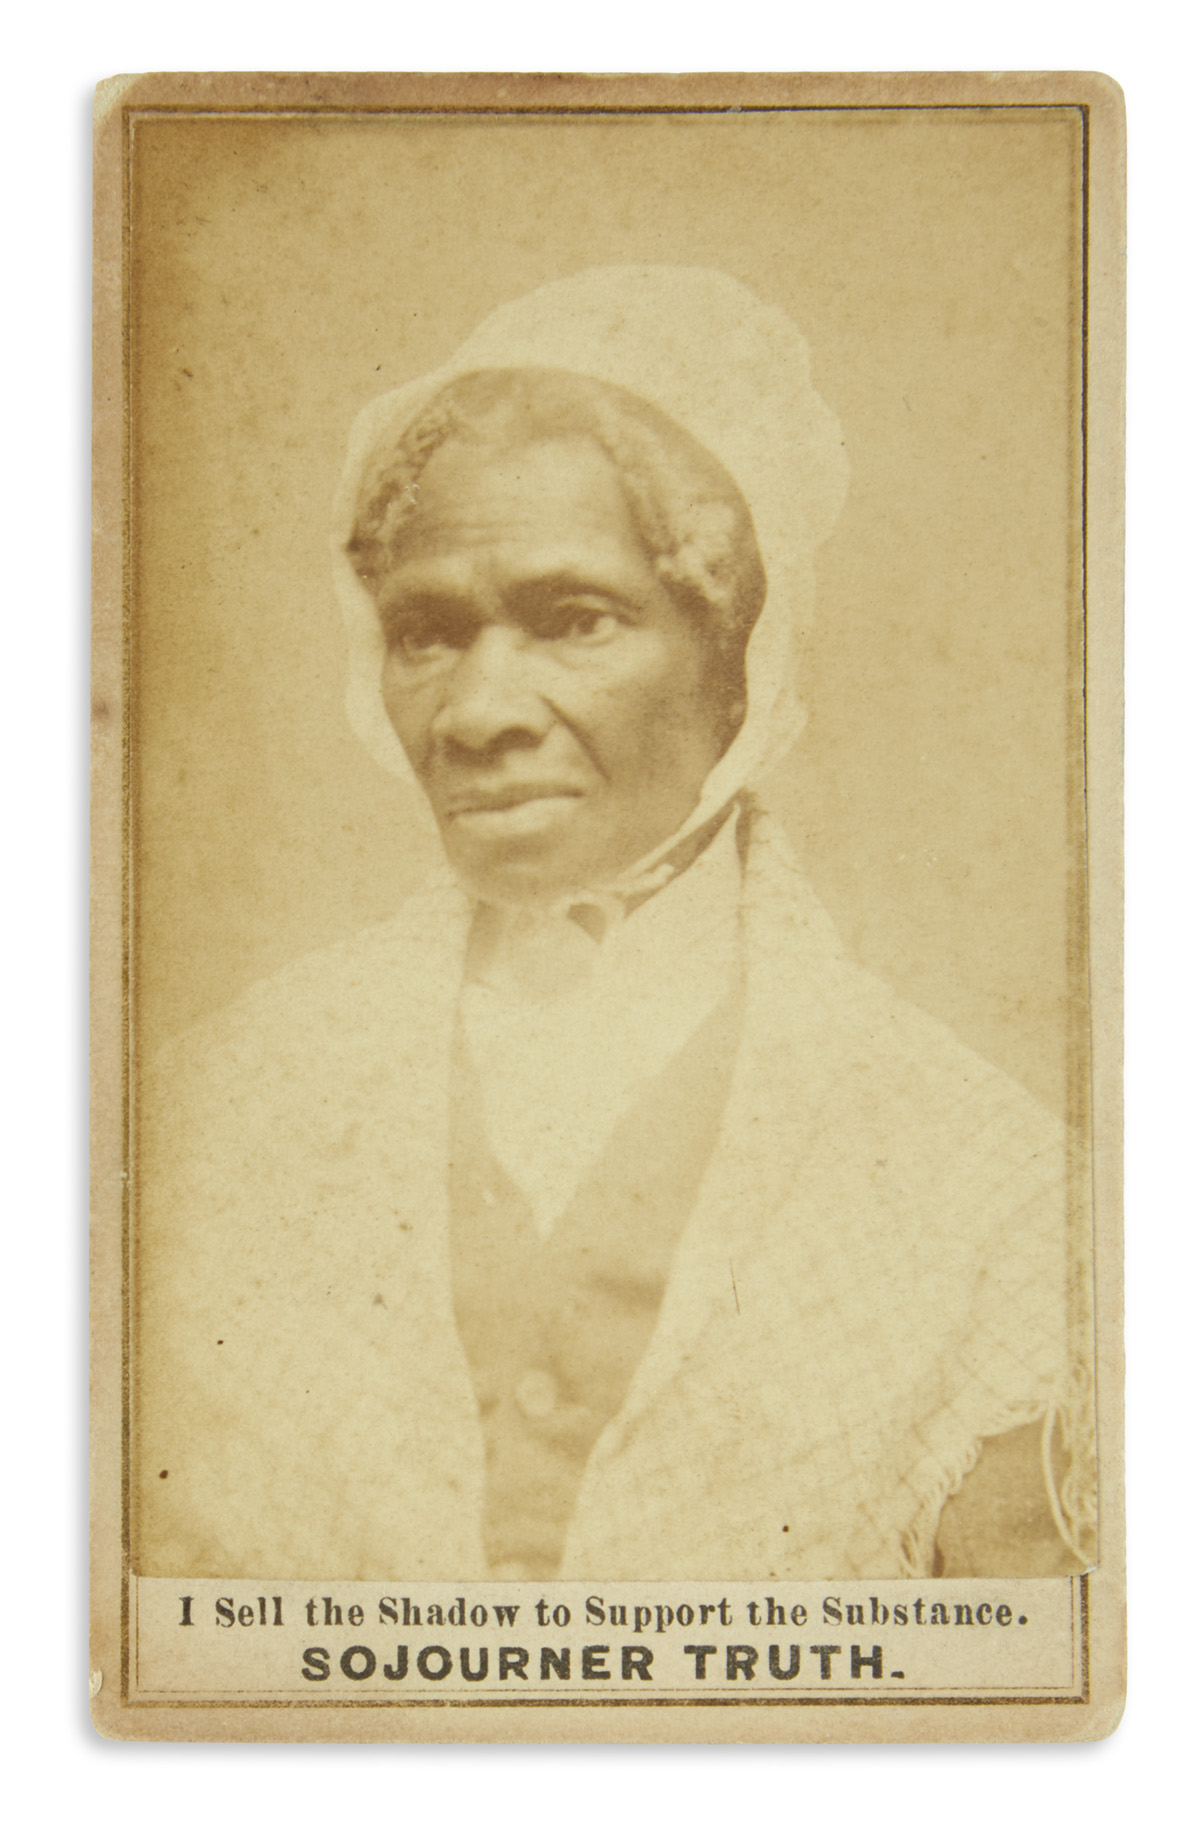 (PHOTOGRAPHY.) [Randall, Corydon C.; photographer?] One of the last carte-de-visite portraits taken of Sojourner Truth.